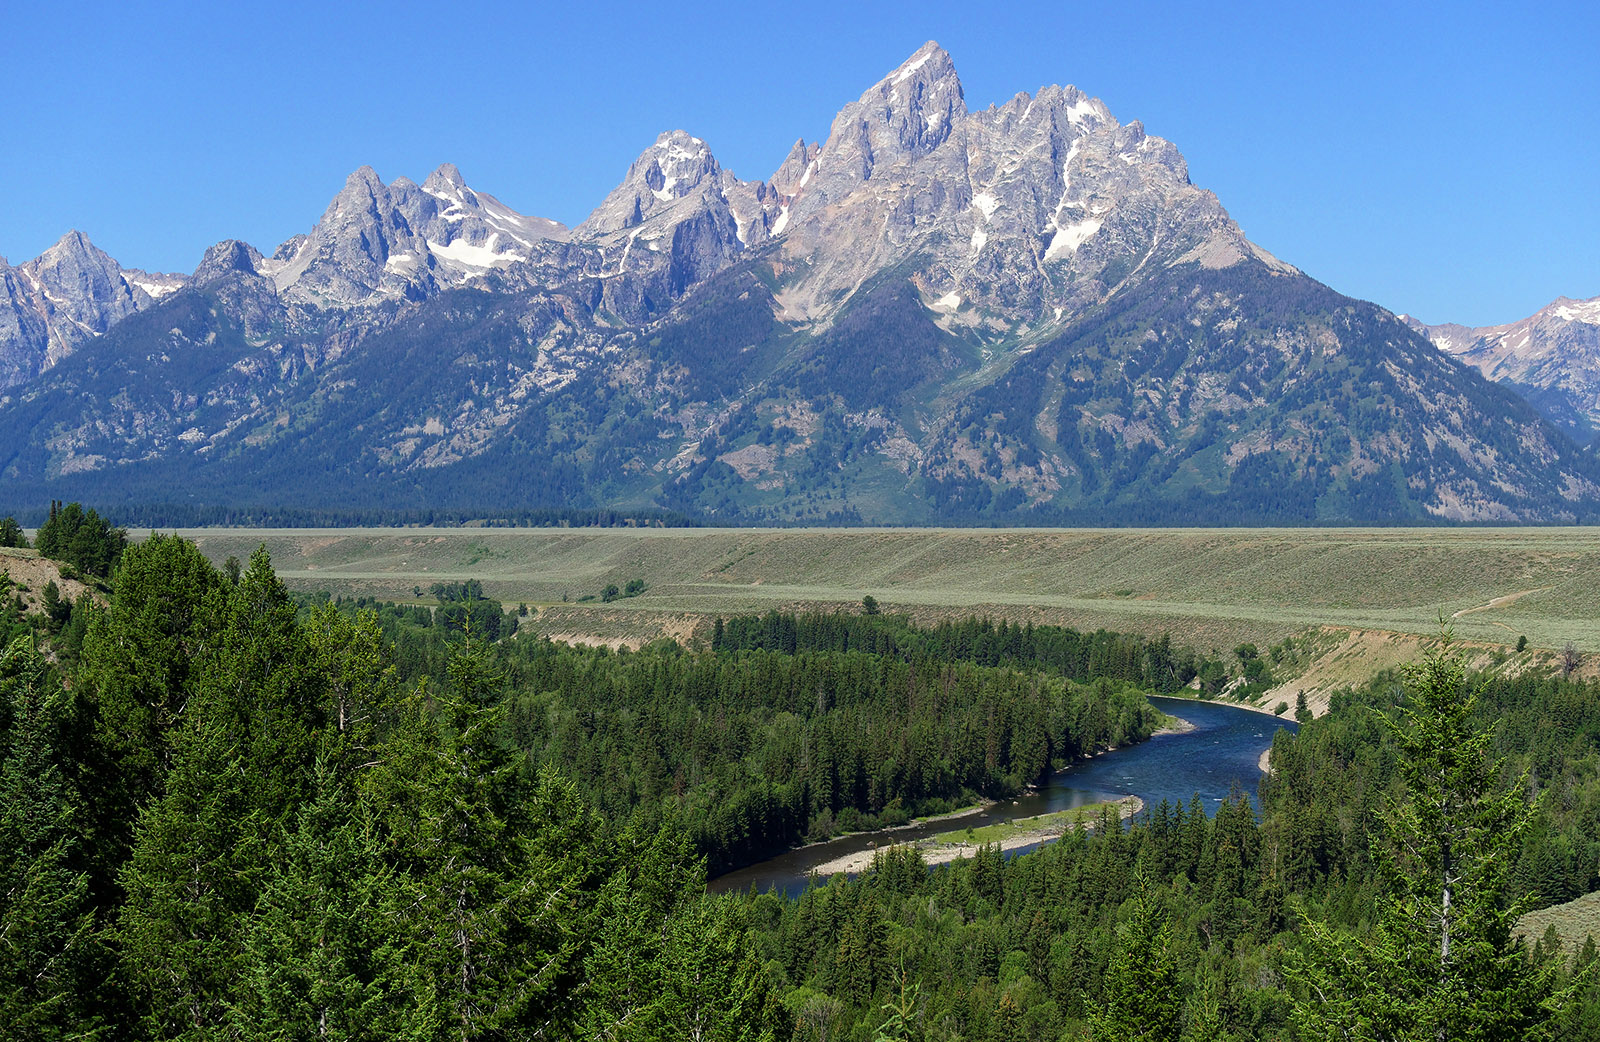 Snake River with Grand Tetons in background.  Snake River terraces are formed from glacial outwash gravels.